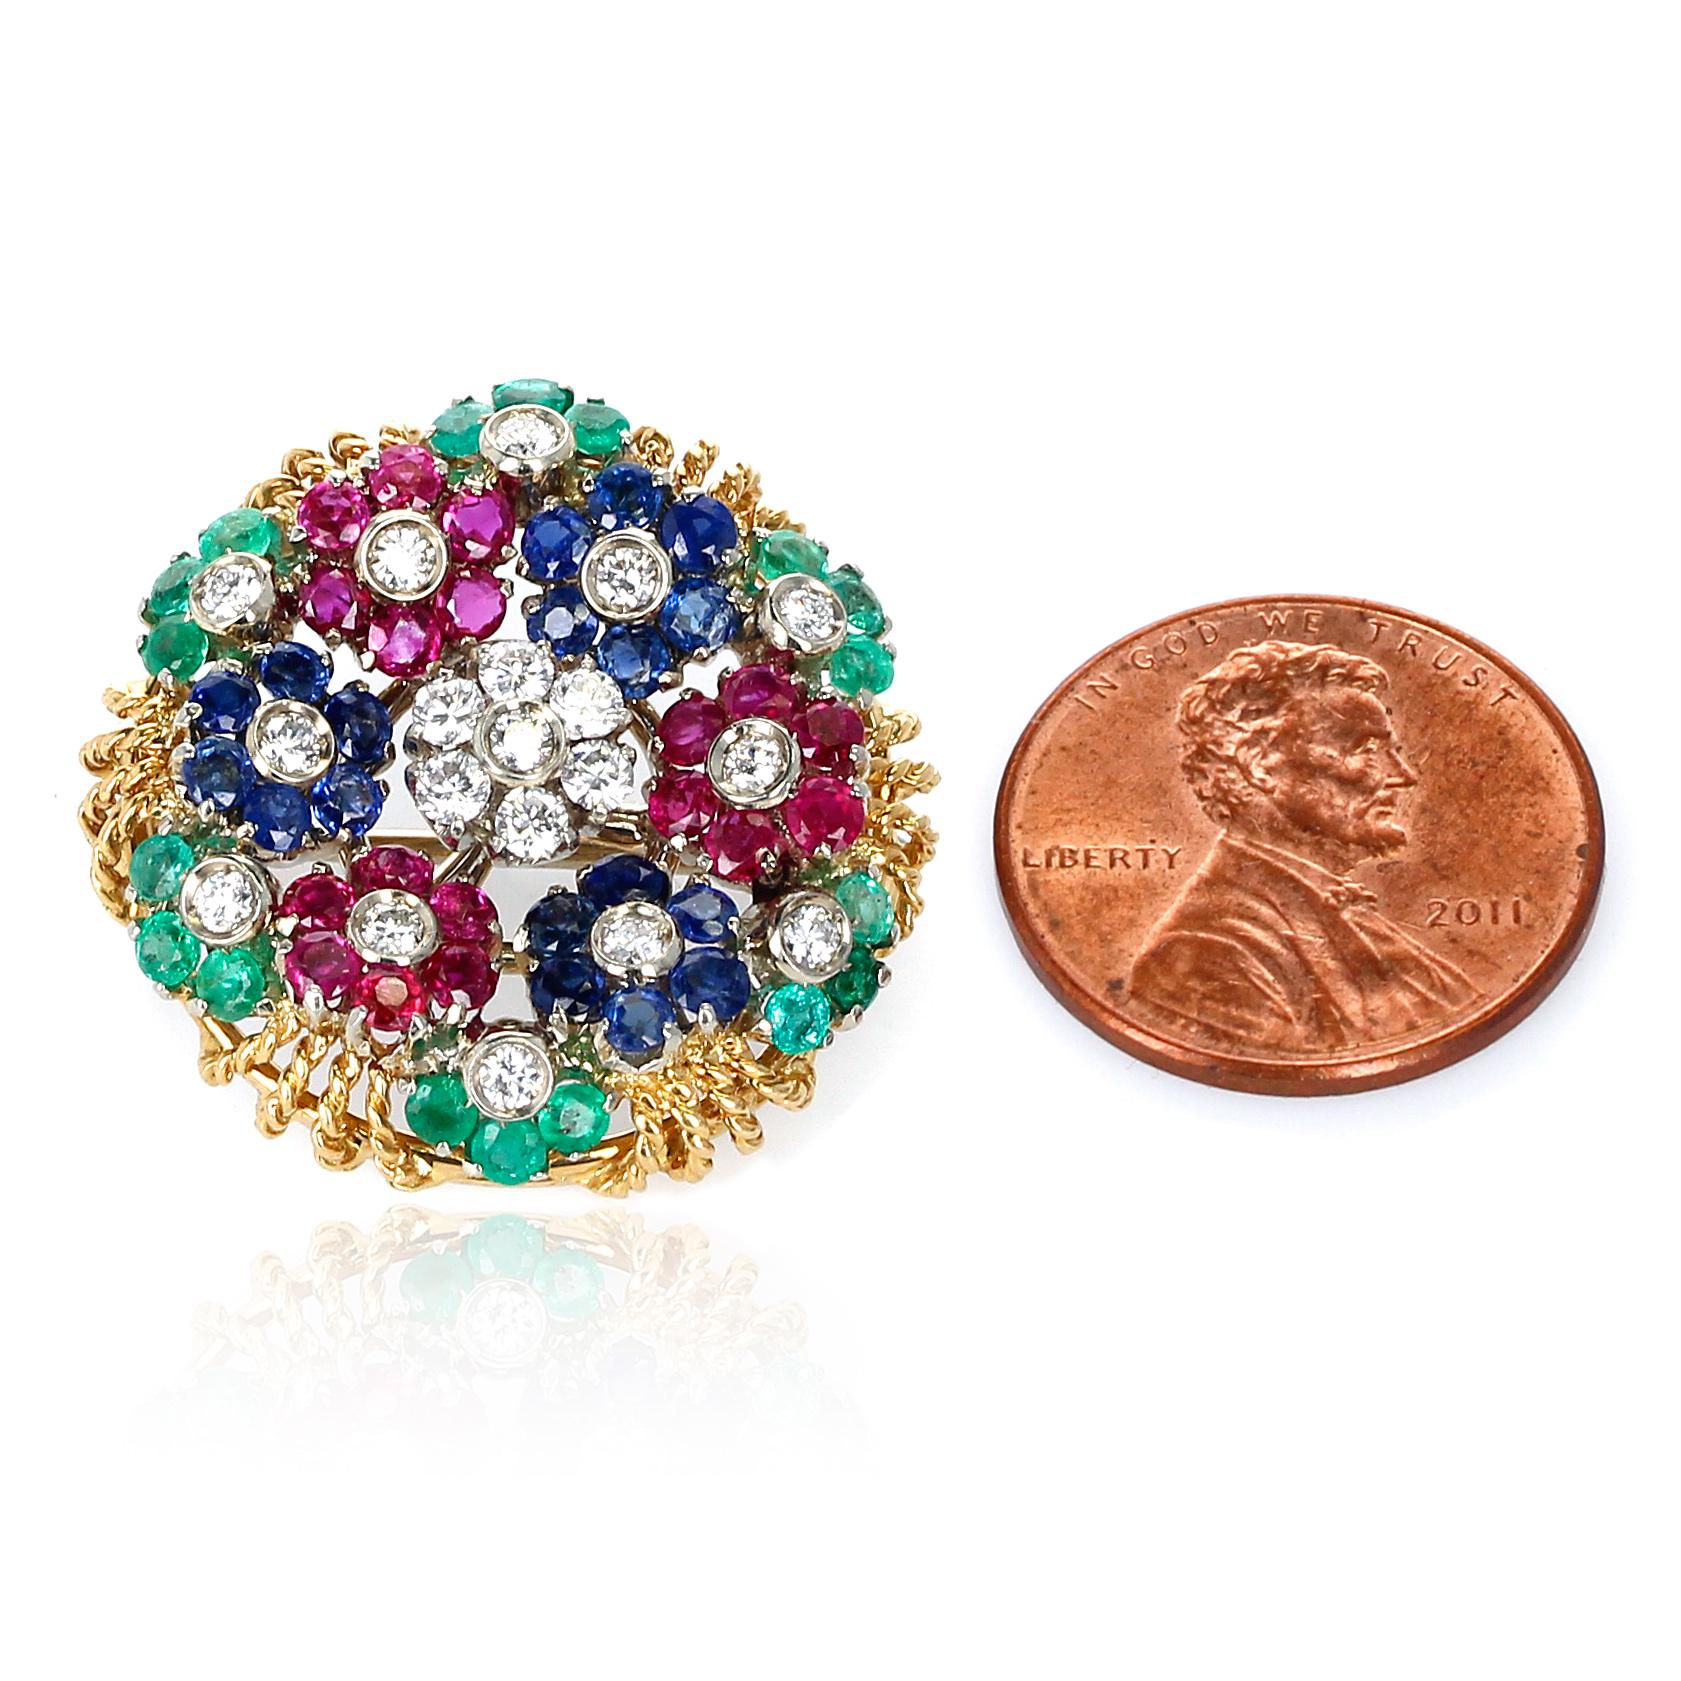 A Ruby, Sapphire, Emerald and Diamond Circular Floral Design Brooch made in 18 Karat Yellow Gold. The diameter of the brooch is 1 inch. The middle flower, with the diamonds, spins. 
